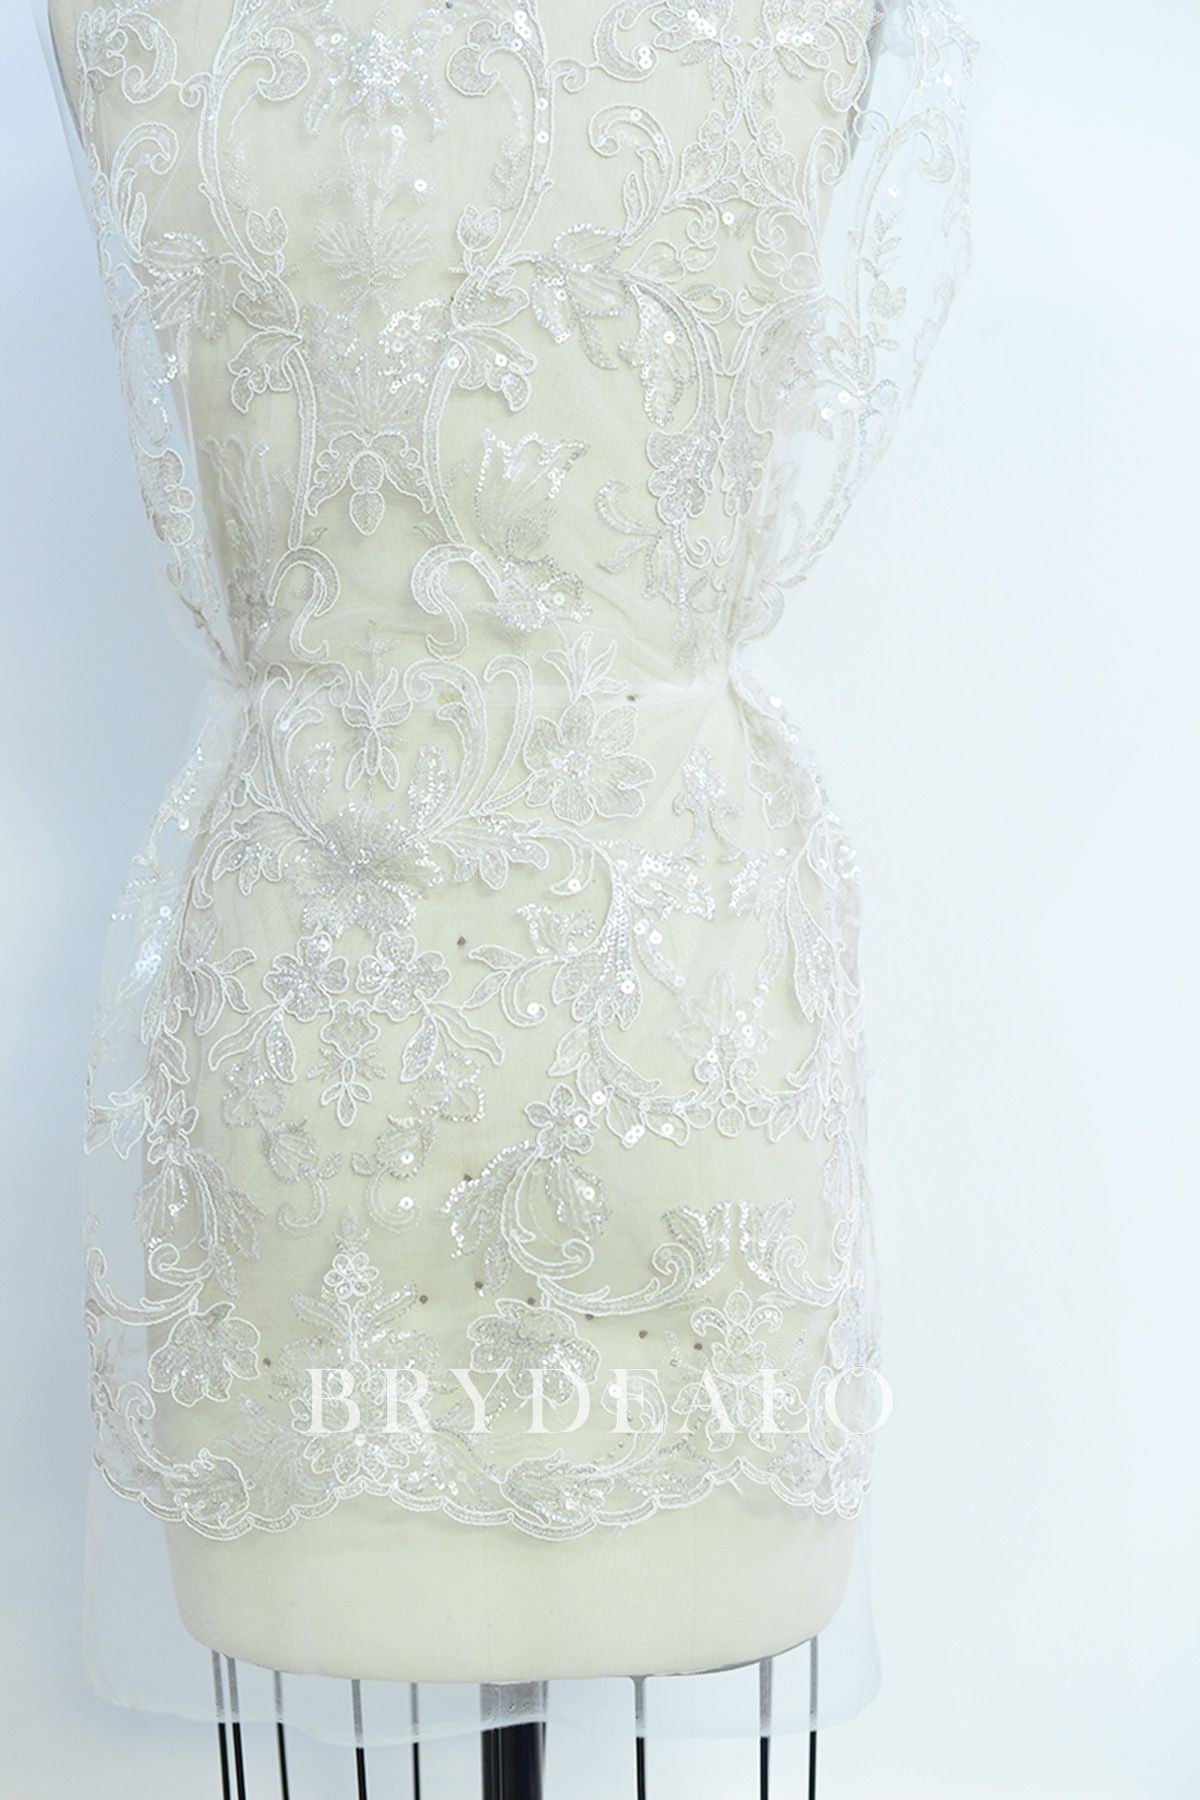 Glittery Sequined Embroidered Lace Fabric by the yard